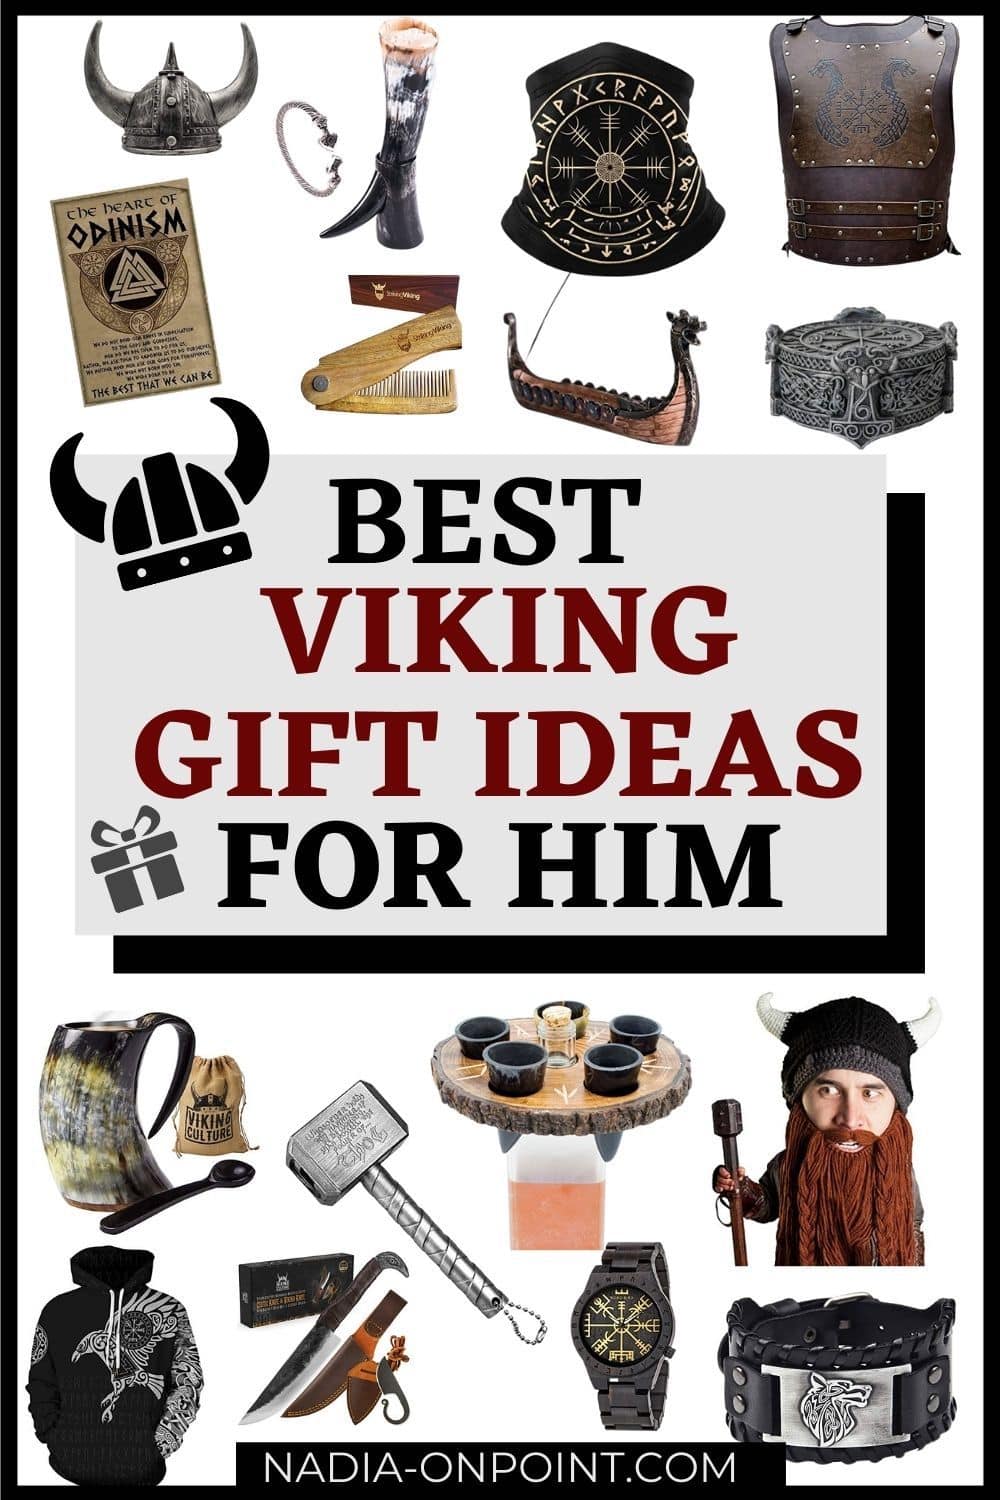 Viking Gifts for Him that are Authentically Awesome - OnPoint Gift Ideas